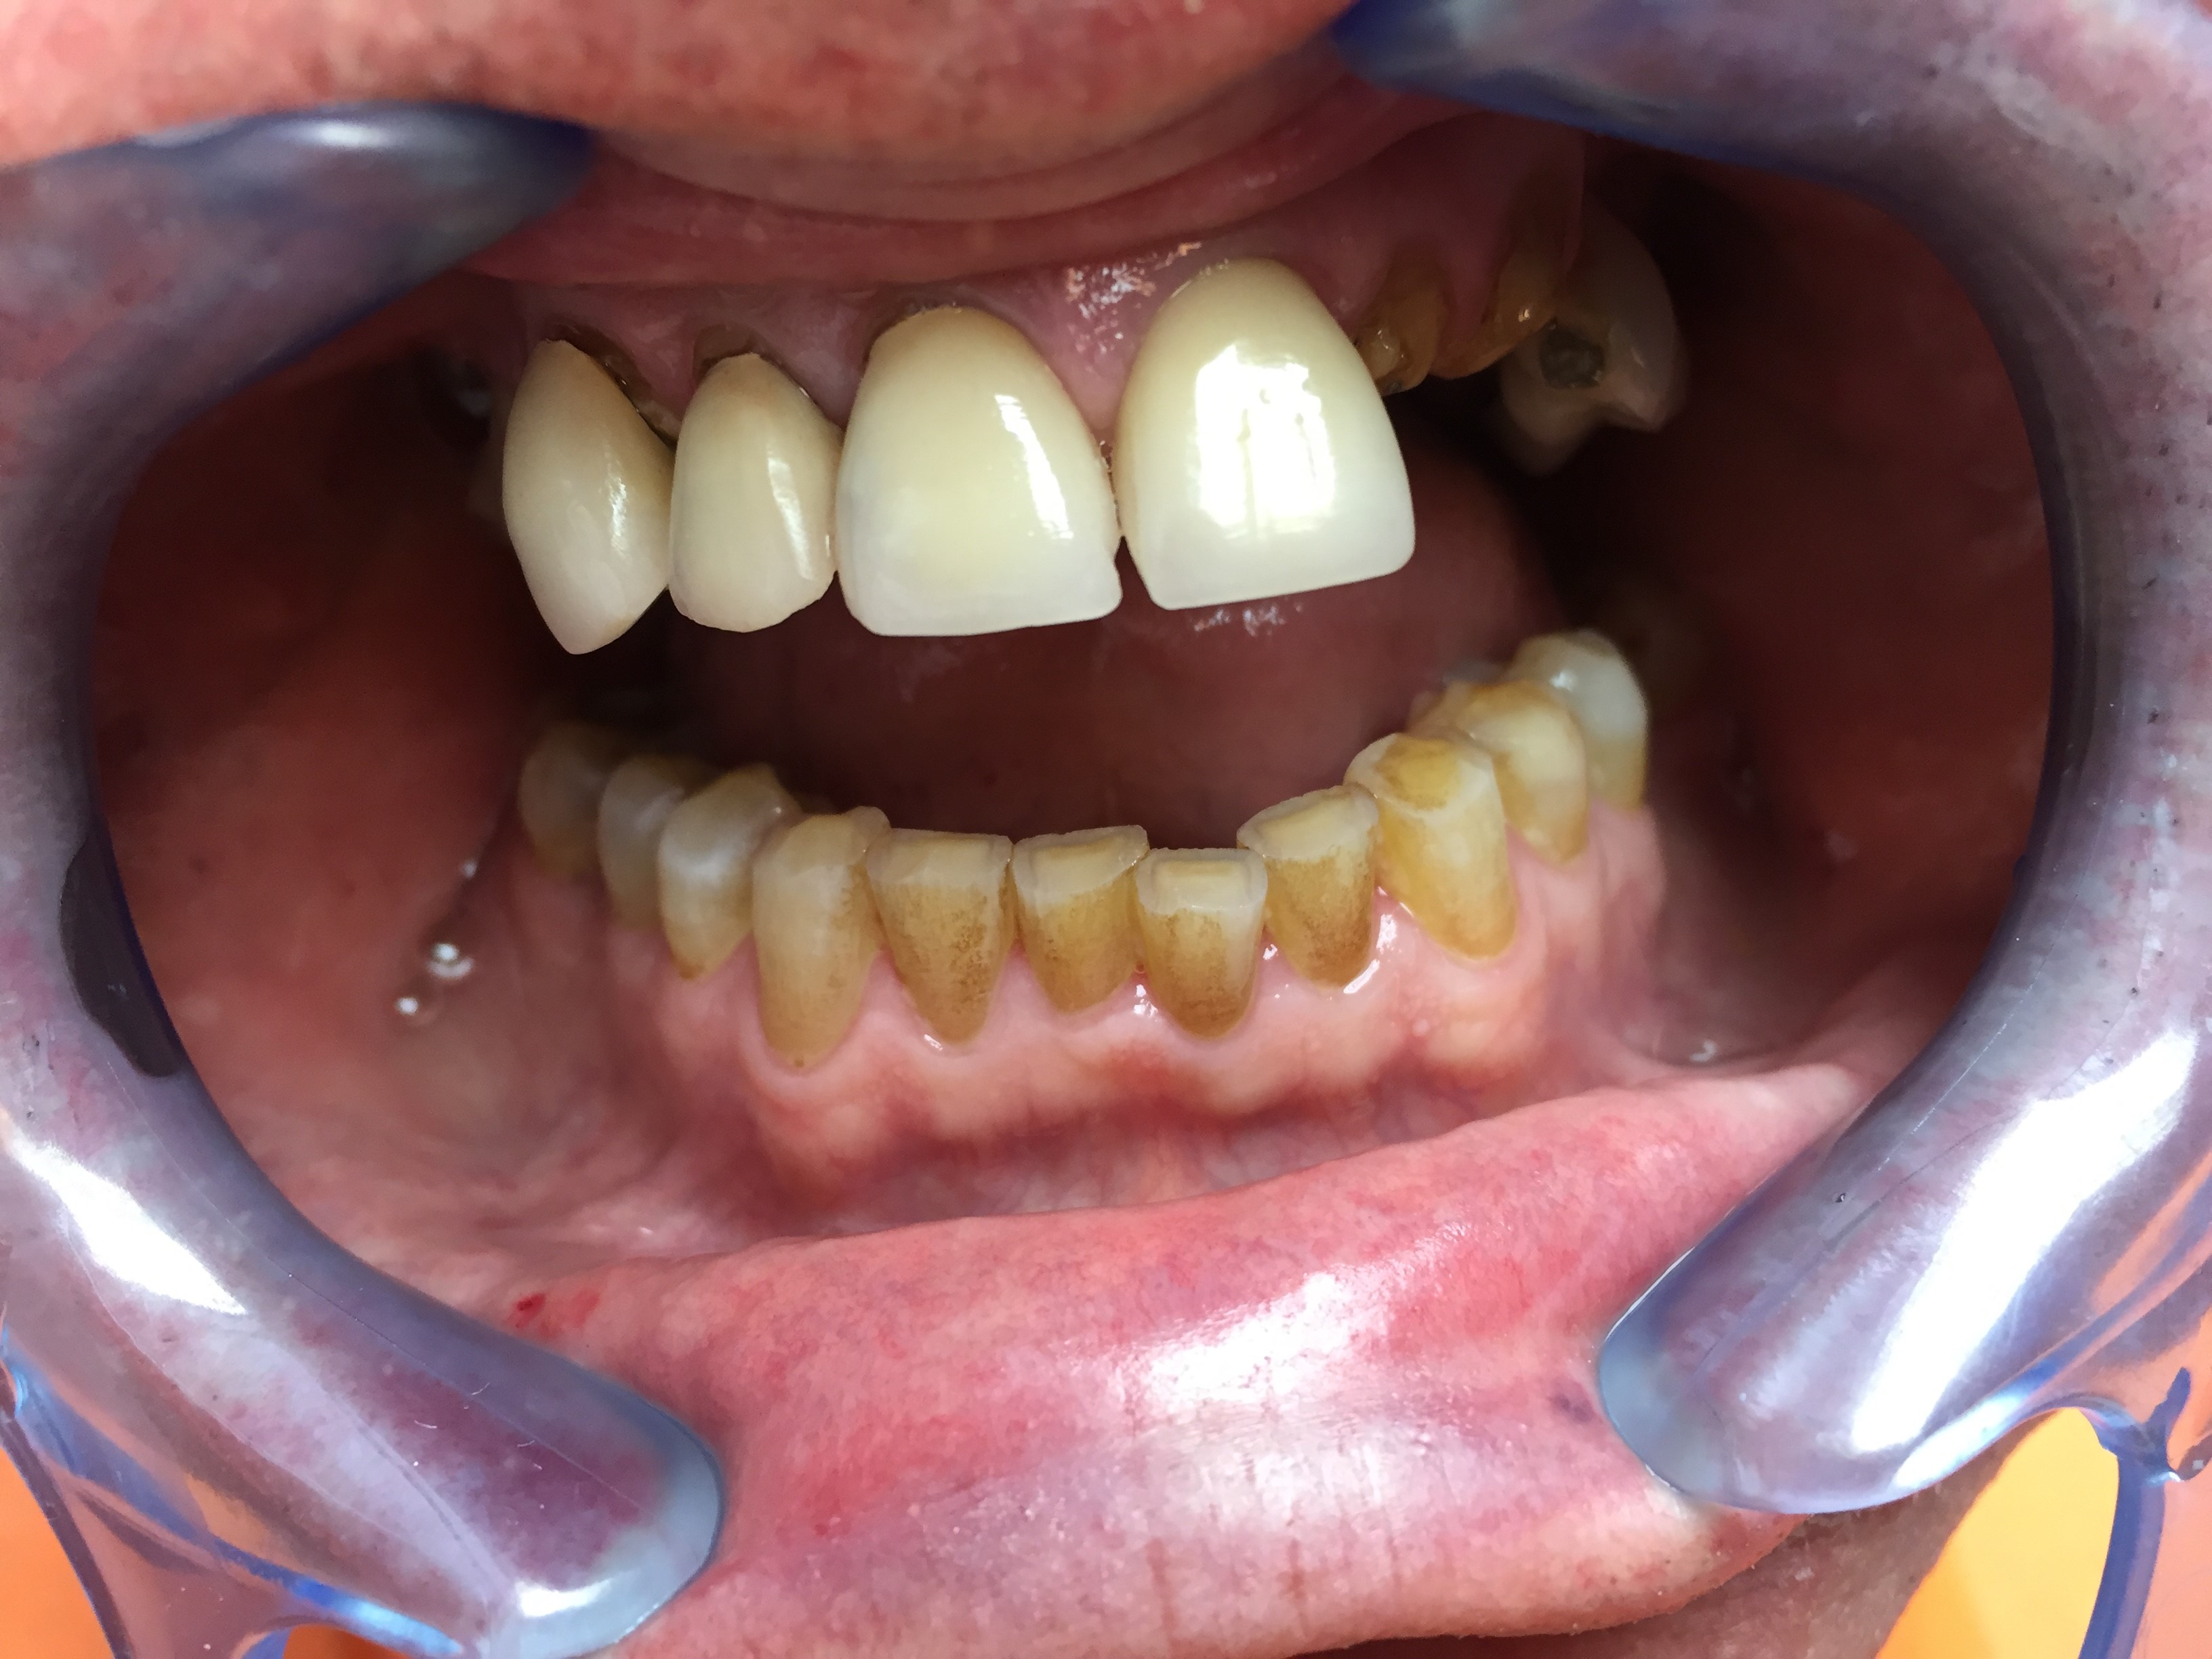 Tooth gap waiting for treatment